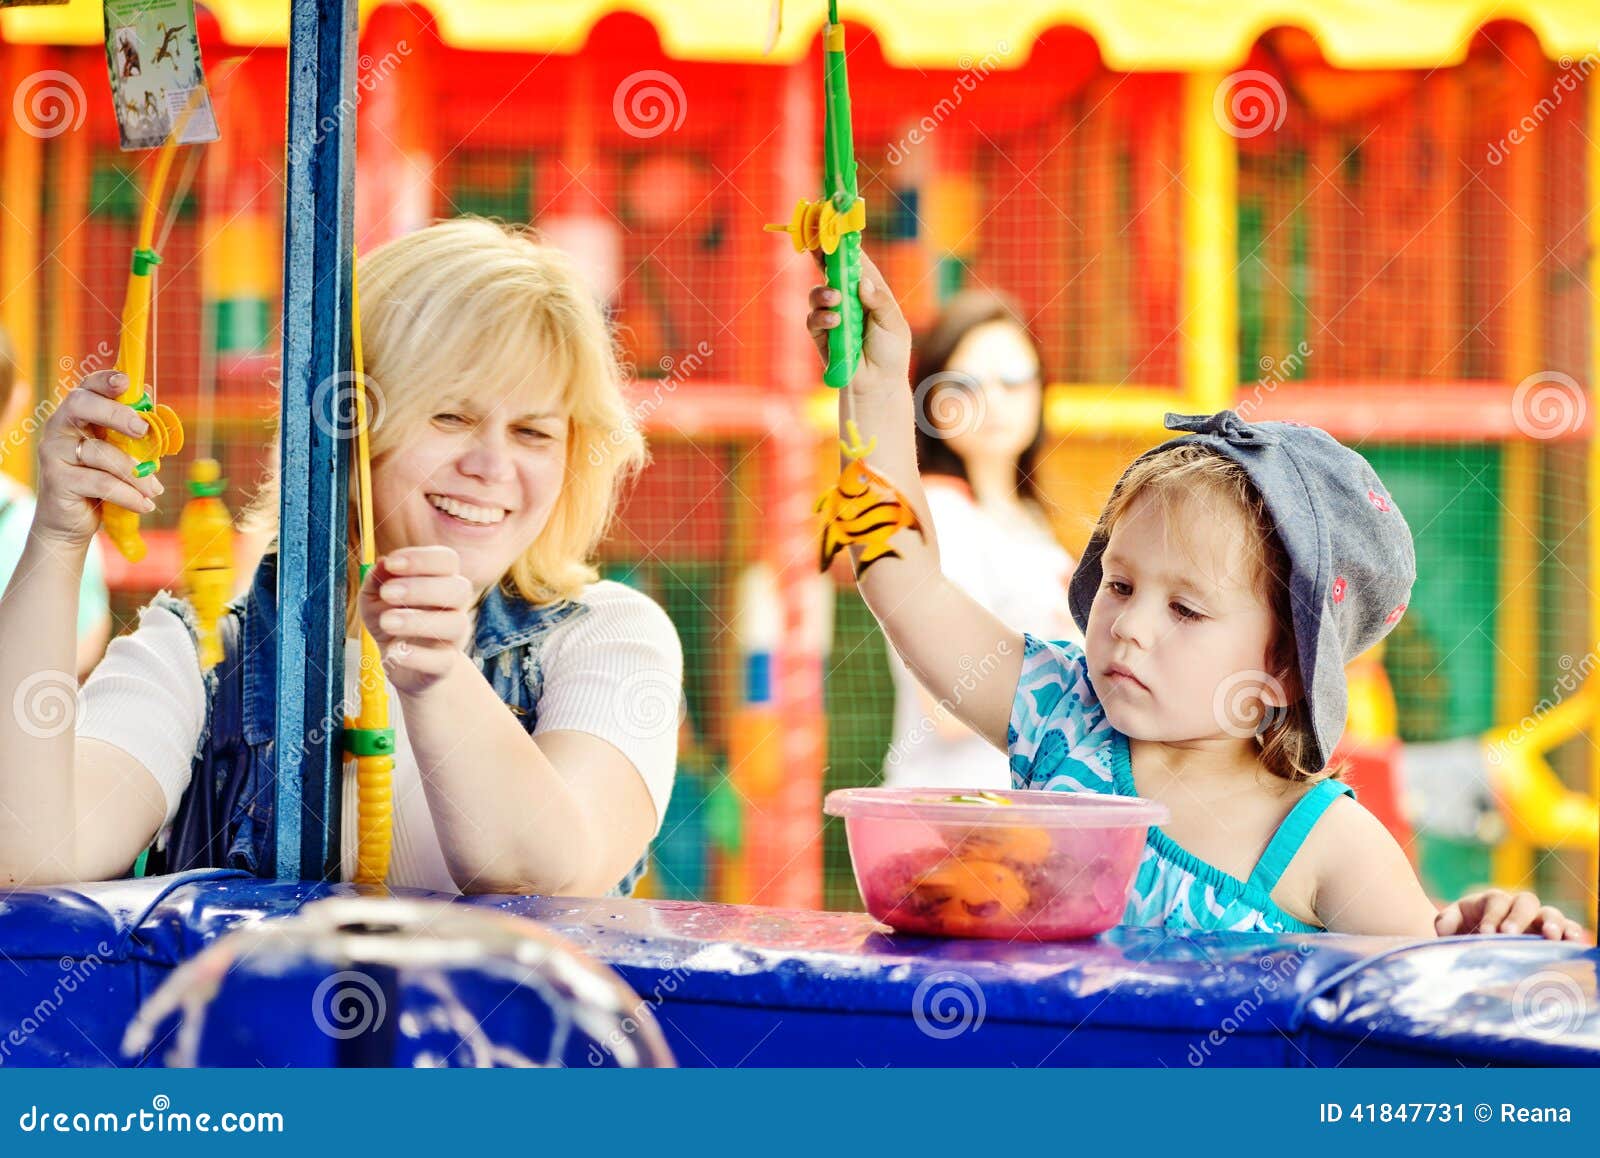 Funny fishing of mother and daughter in amusemen park.